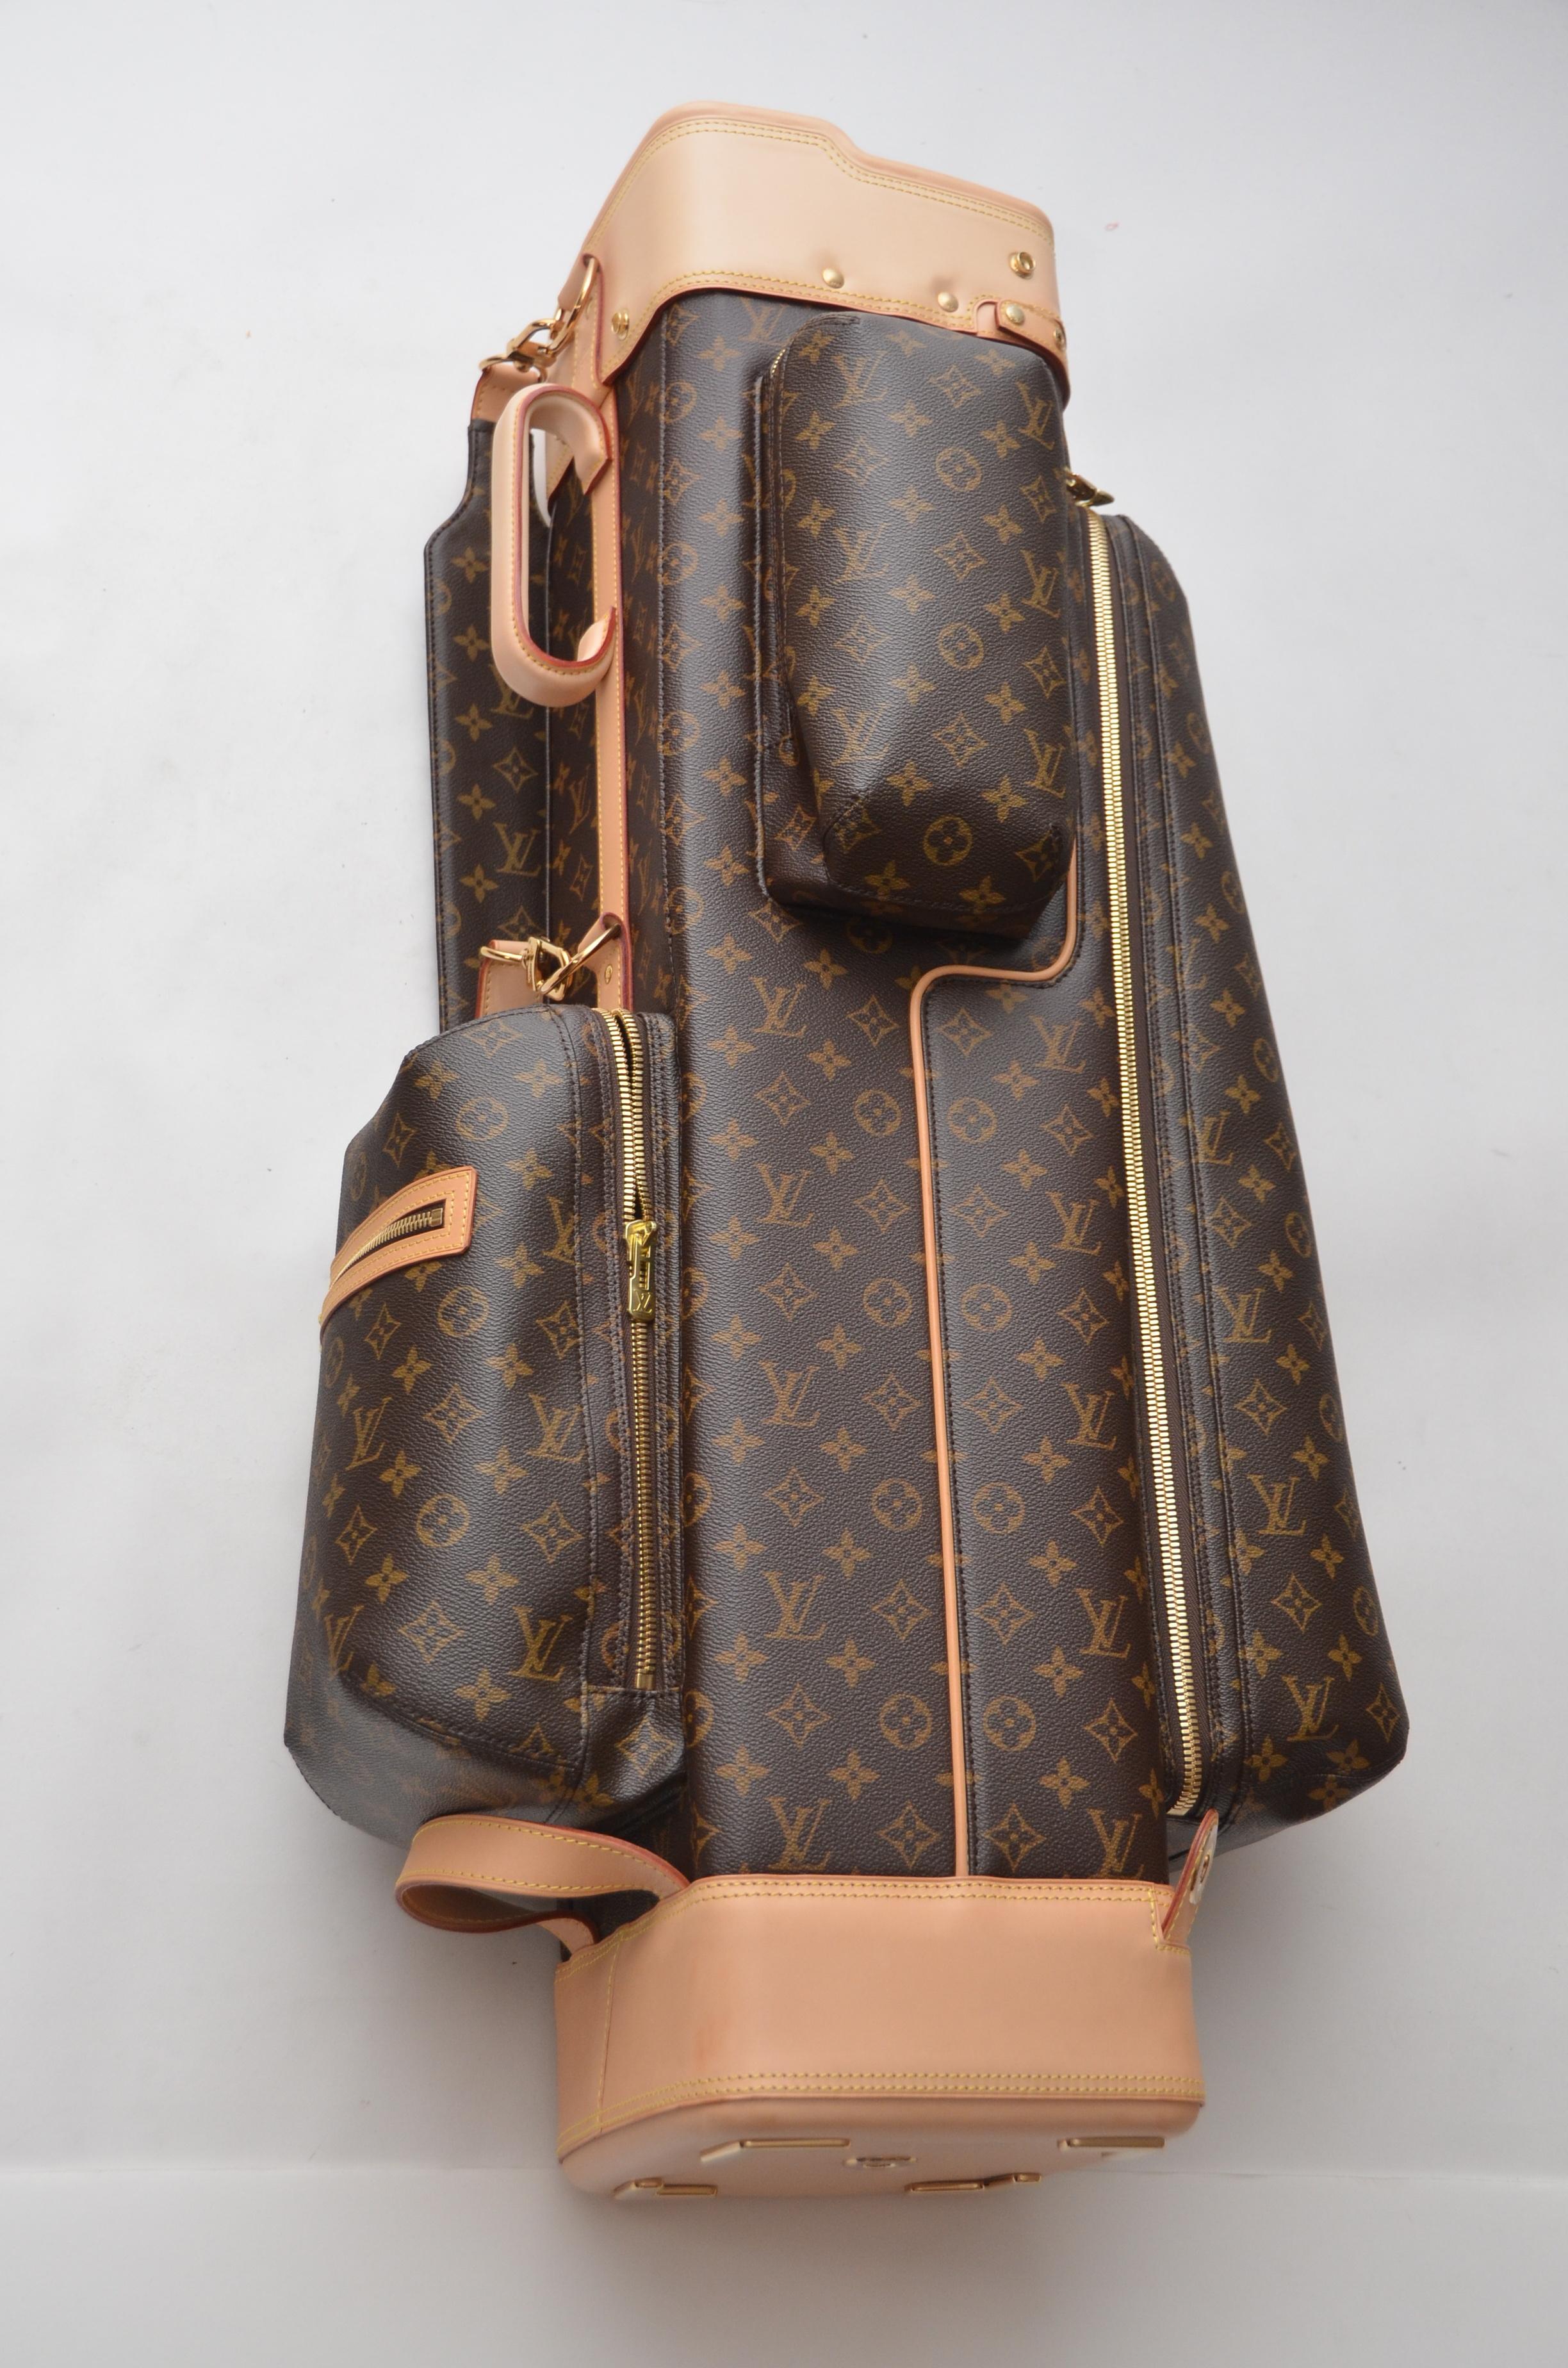 LOUIS VUITTON Golf Bag Monogram Limited Edition  Mint  Suggested Retail  $22, 000 3